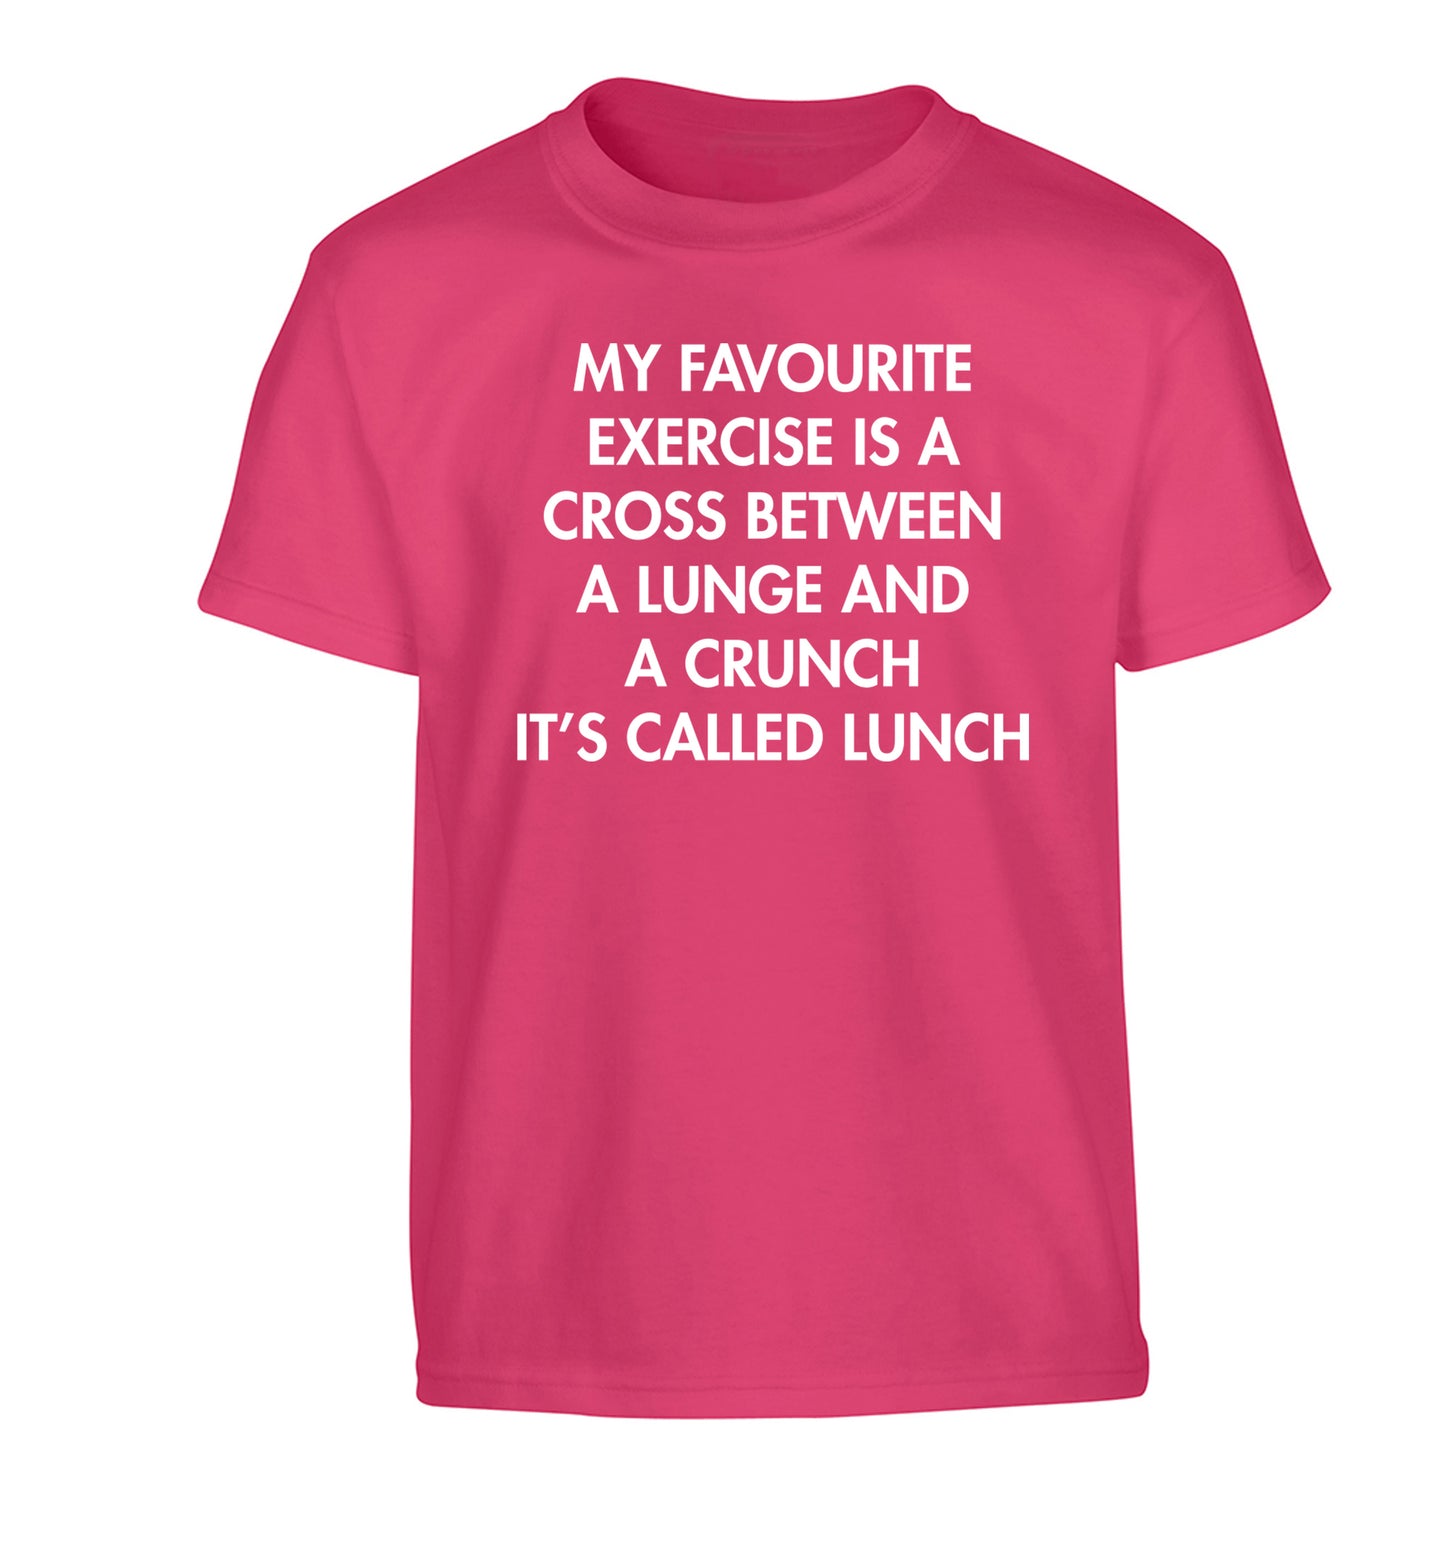 My favourite exercise is a cross between a lung and a crunch it's called lunch Children's pink Tshirt 12-14 Years